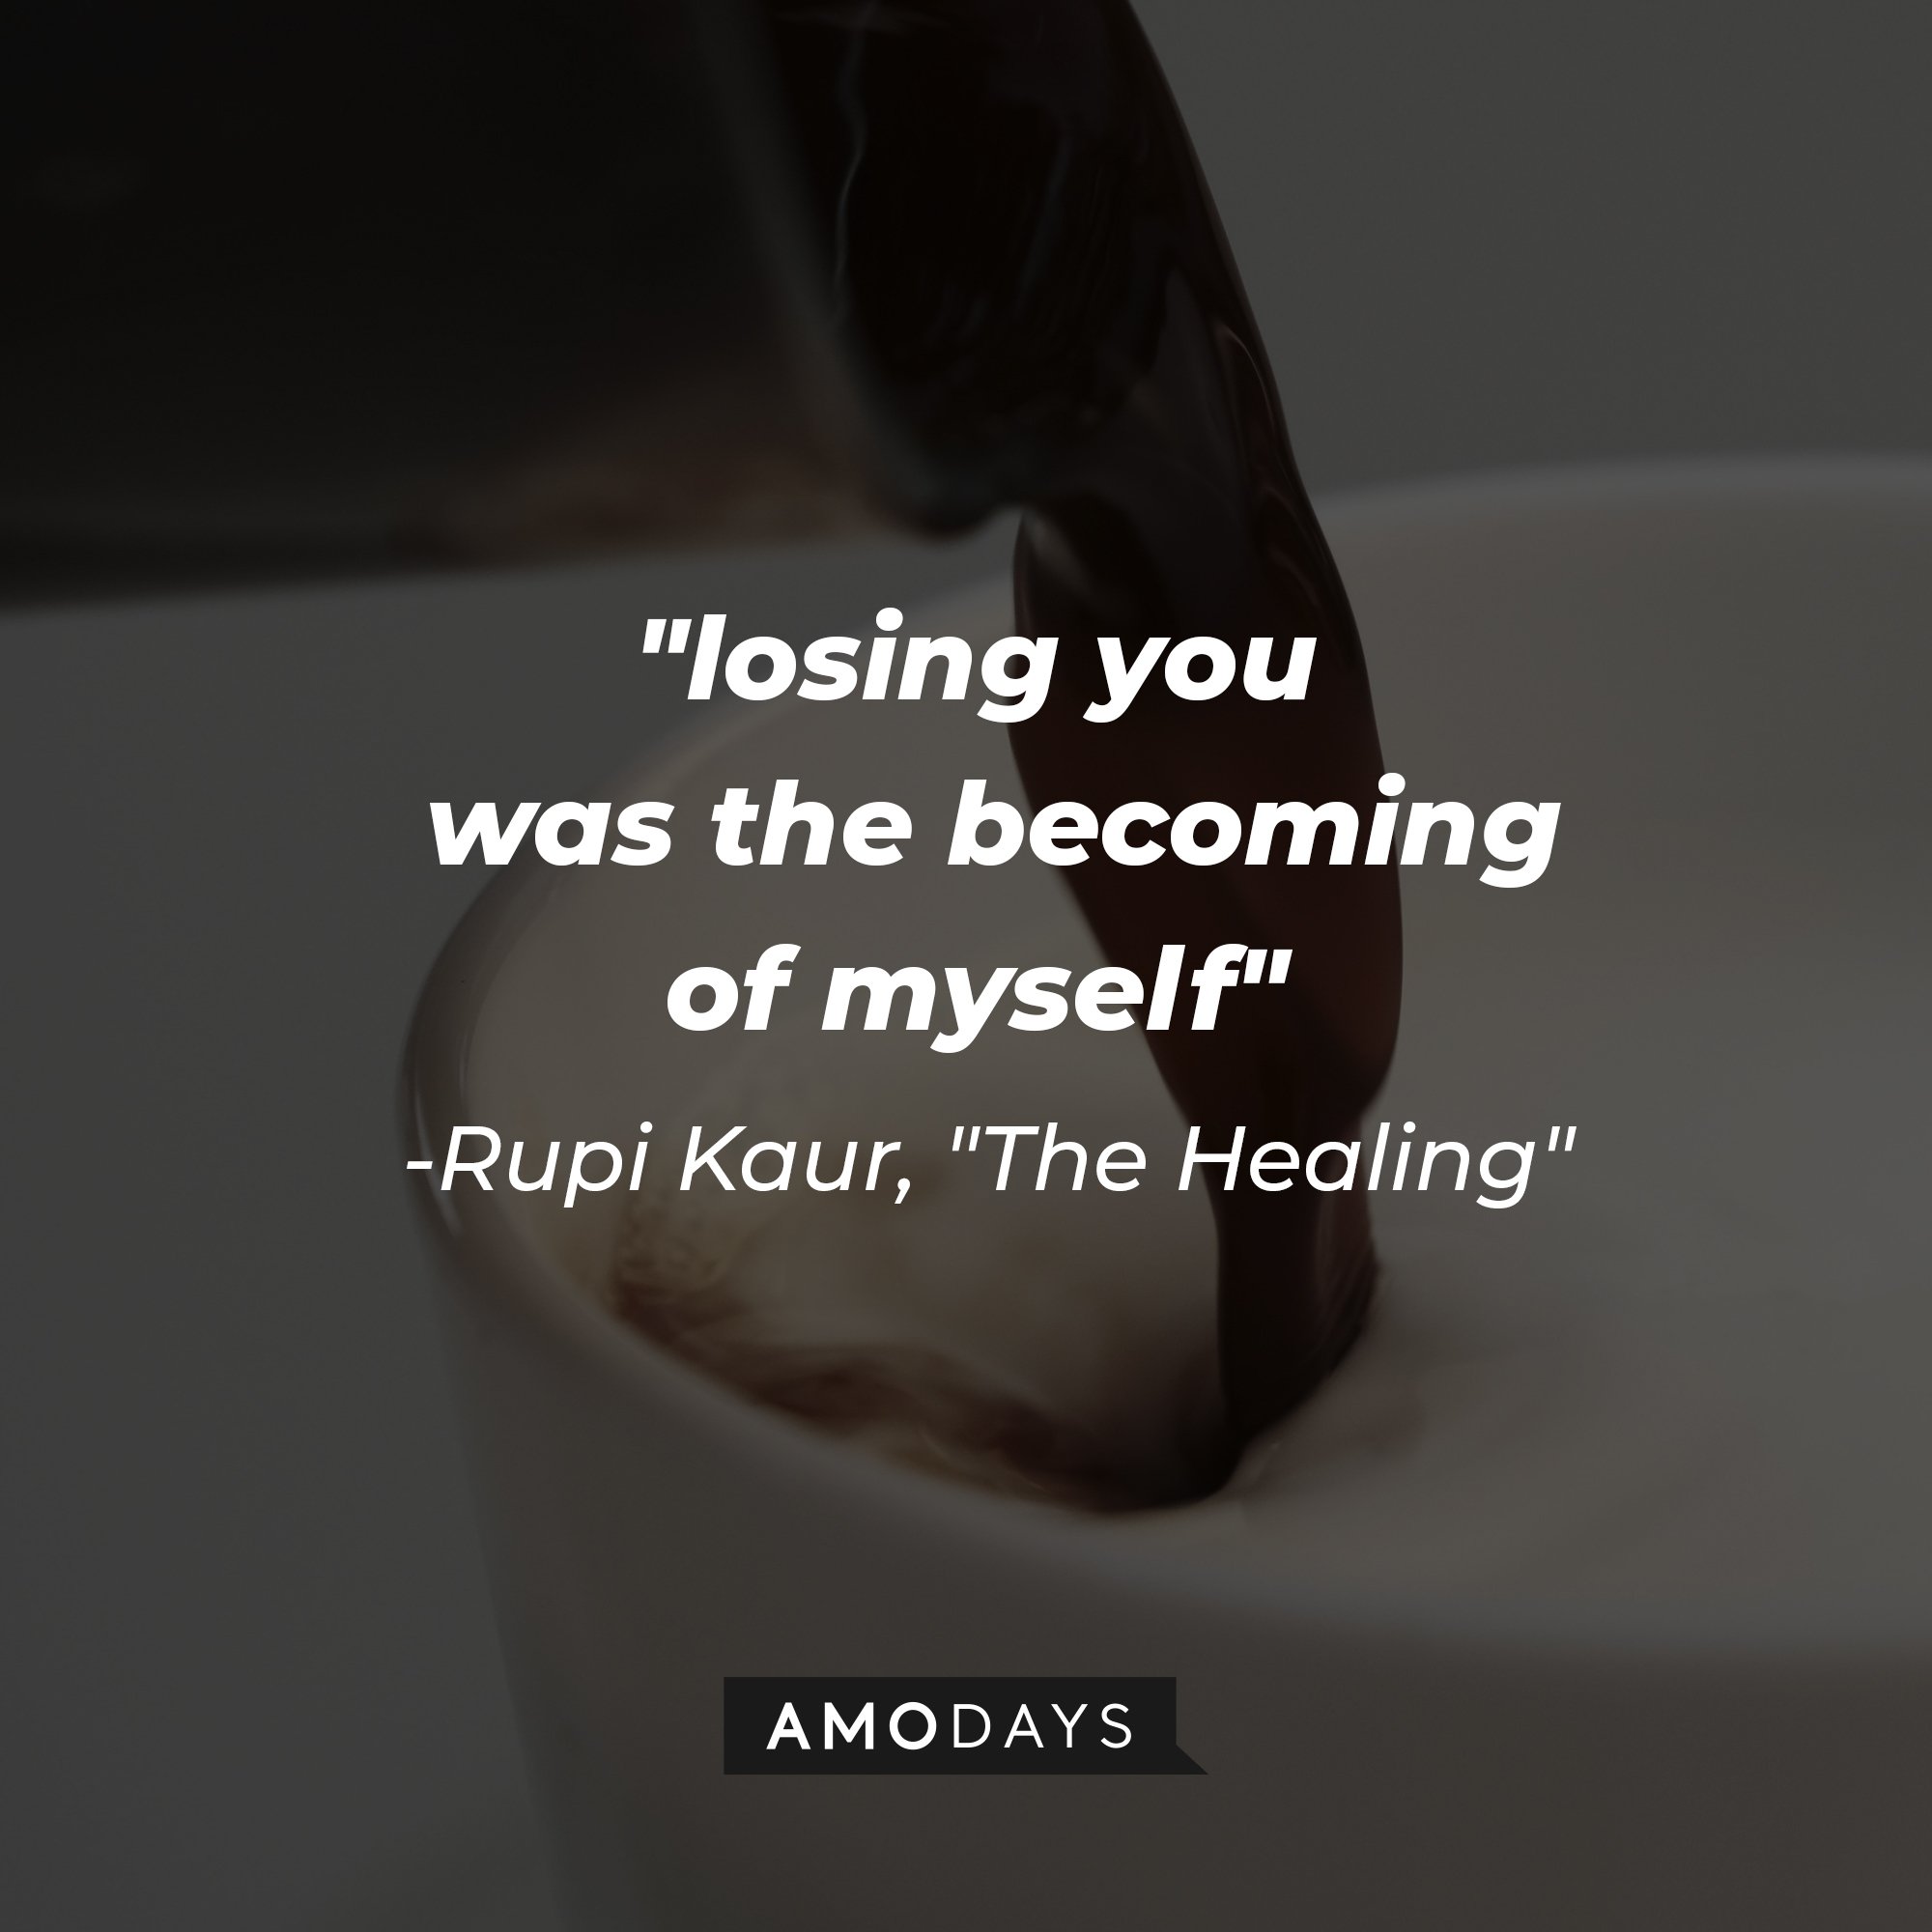 Rupi Kaur's "The Healing" quote: "losing you was the becoming of myself" | Image: AmoDays